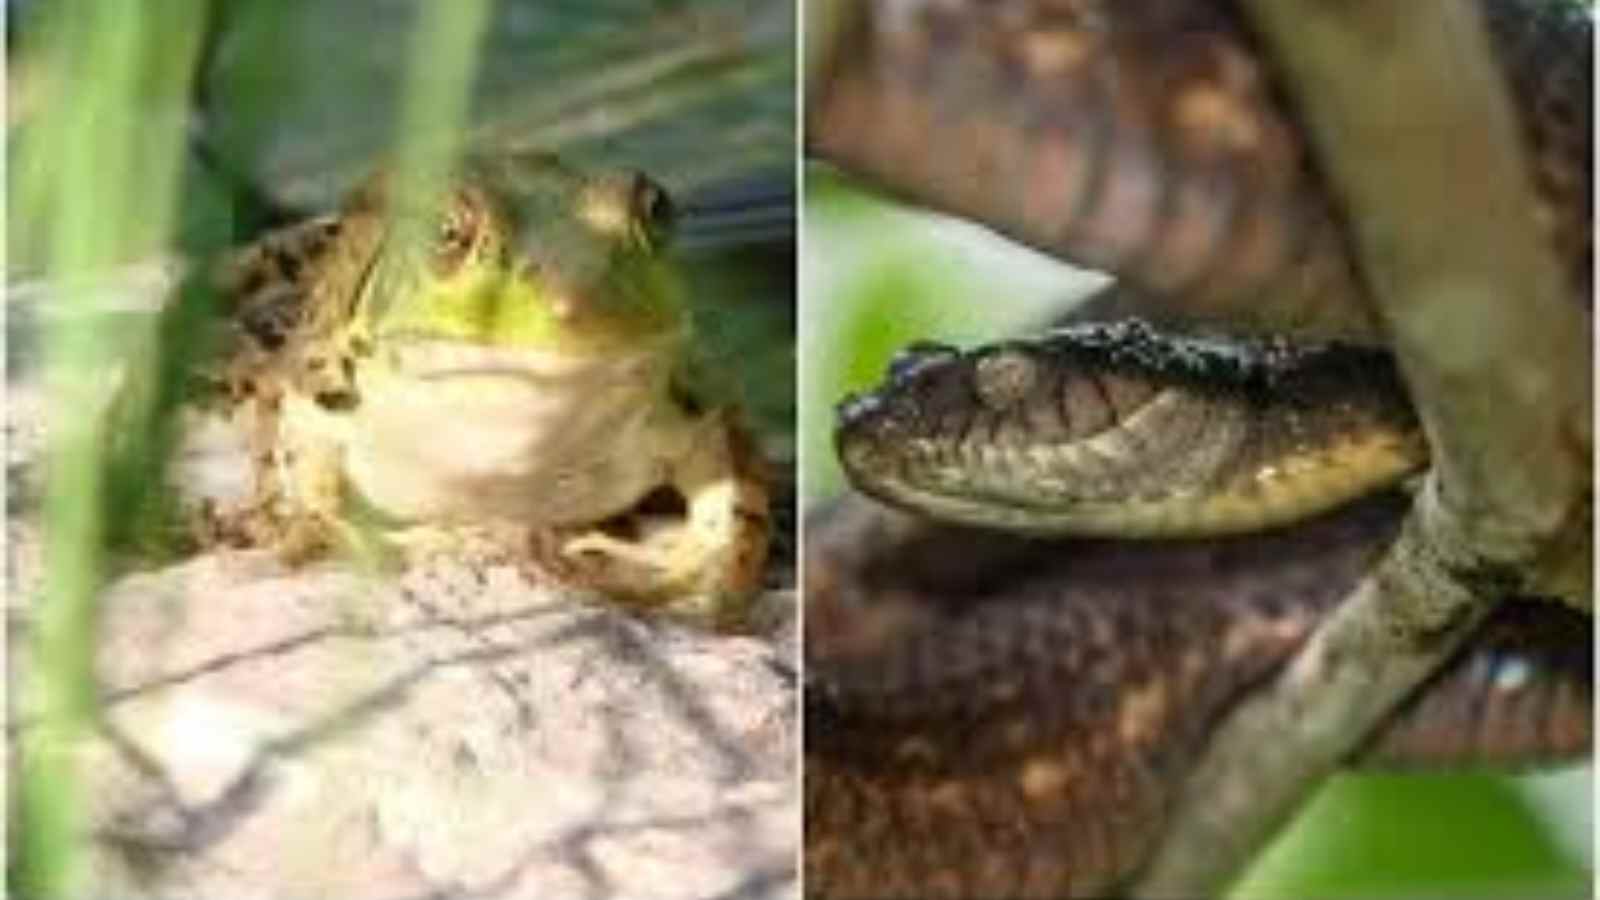 Invasive species of snake and frog